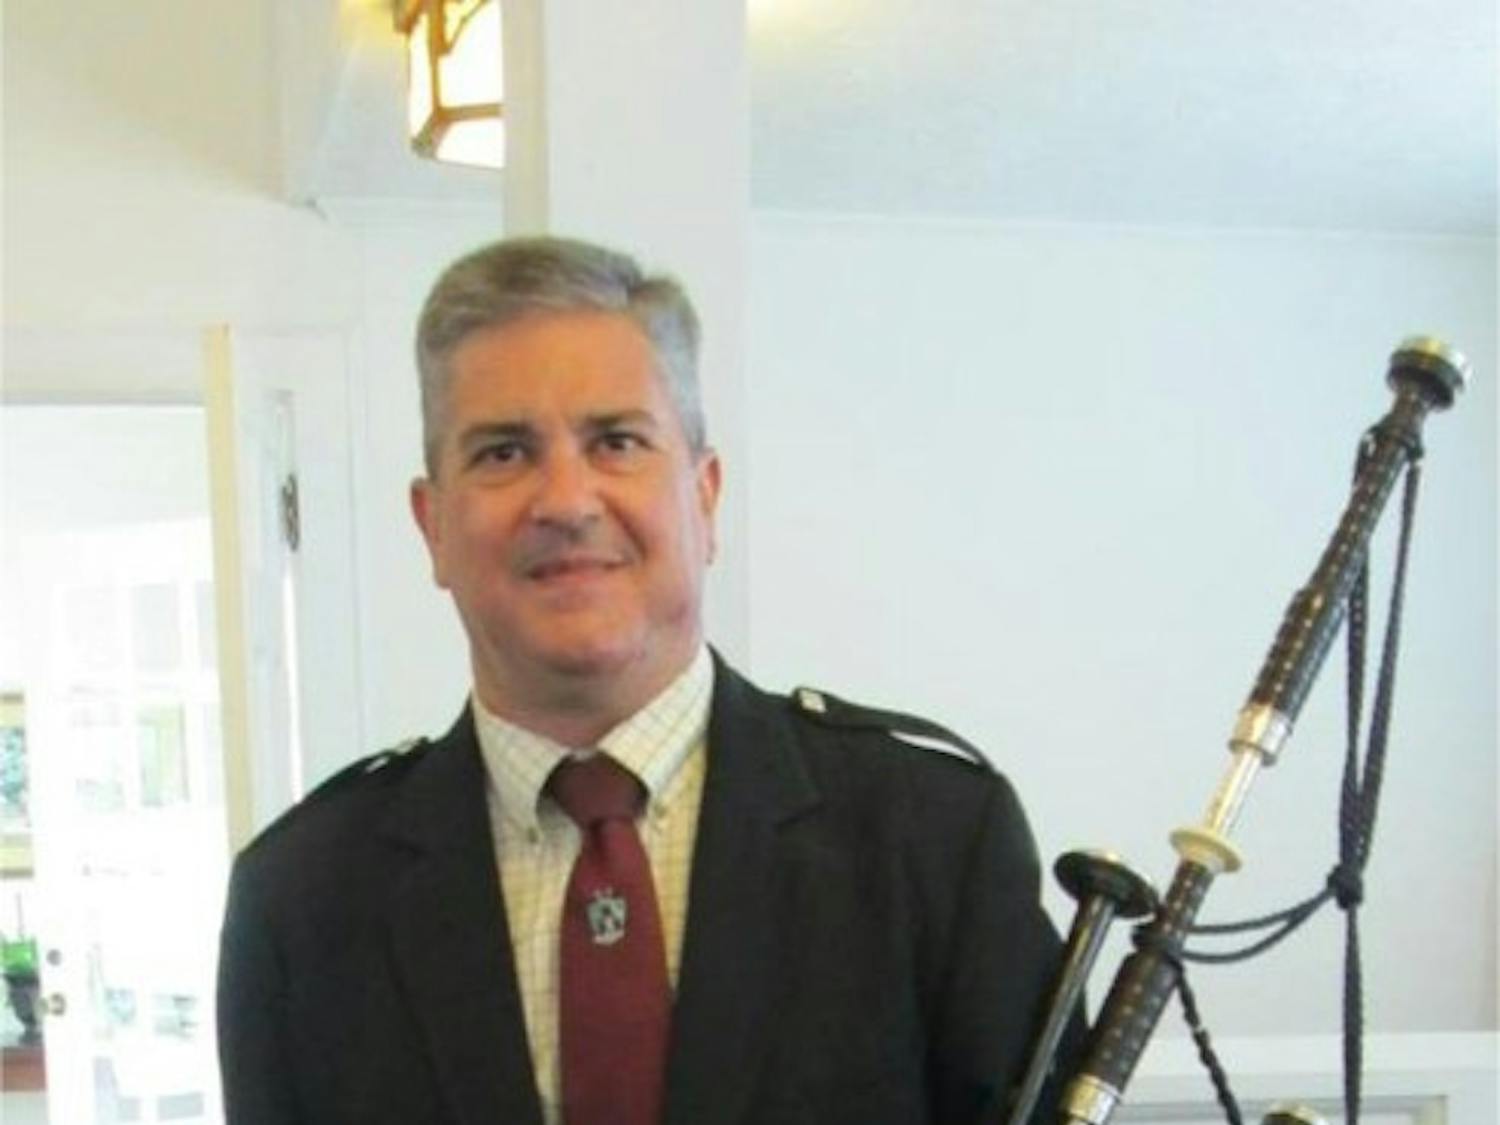 Bill Caudill will be playing the bagpipes at the Tales and Tunes of the Scottish Highlands event on March 23rd.&nbsp;Photo Courtesy of Bill Caudill.